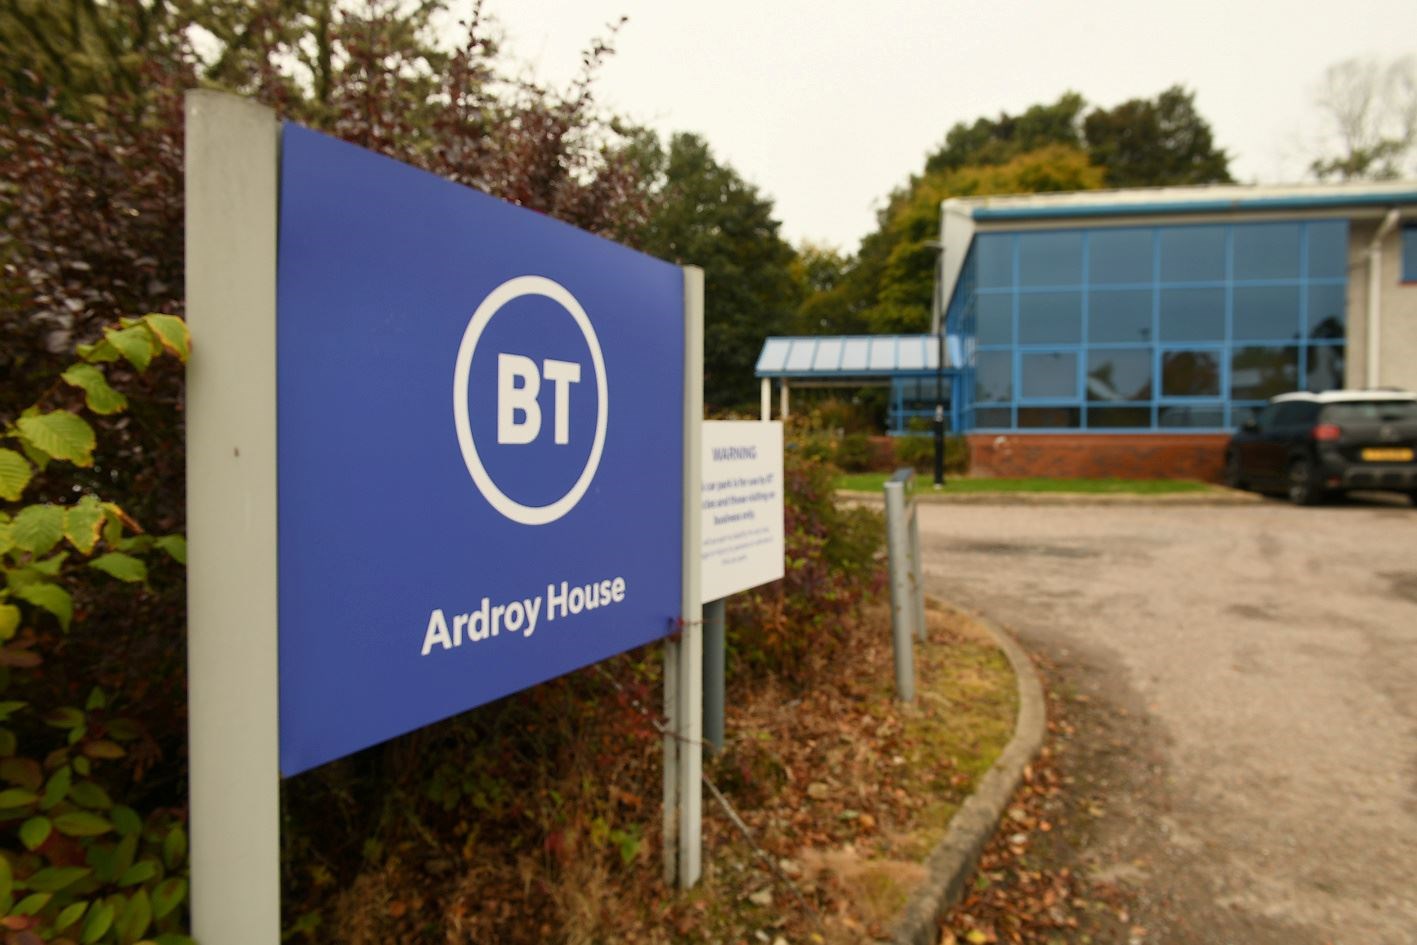 The BT call centre at Ardroy House is under threat. Picture: James Mackenzie.